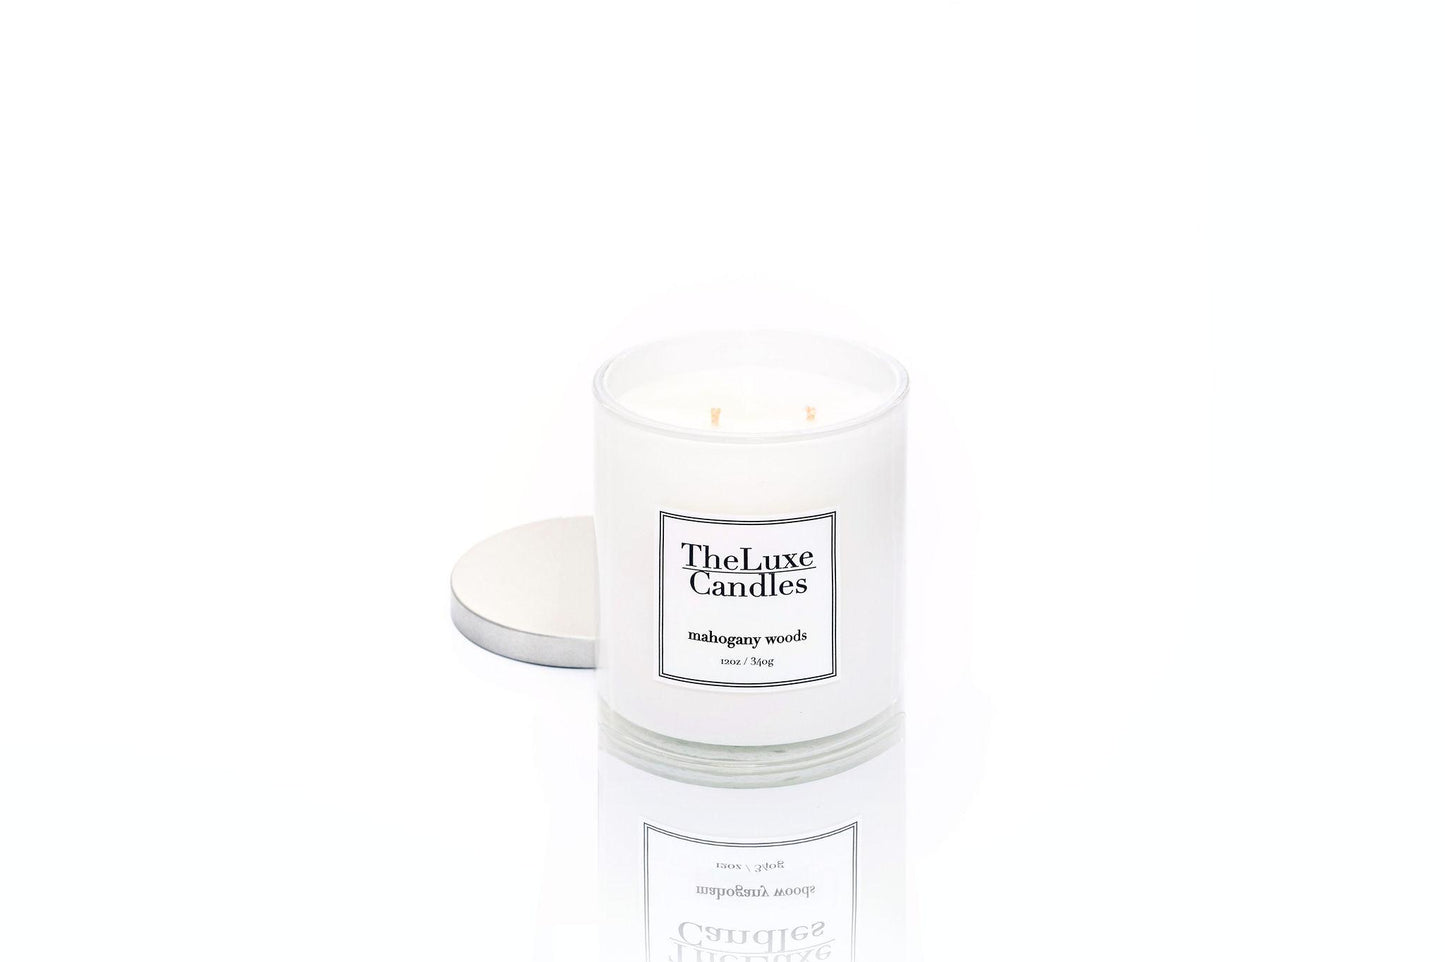 MAHOGANY WOODS LUXE CANDLE